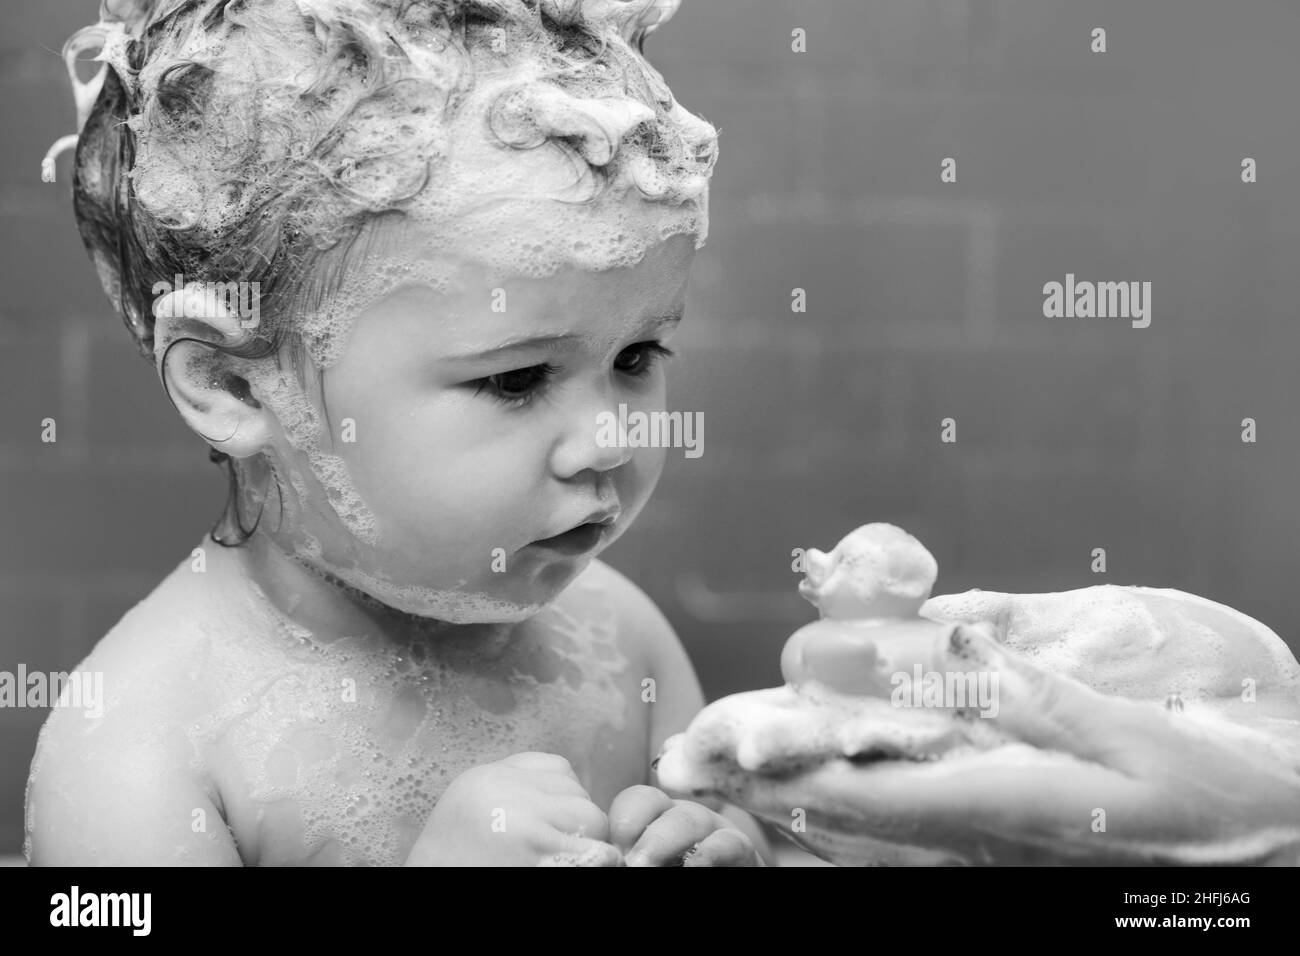 Hygiene and body care for children. Little baby child is washing her ...